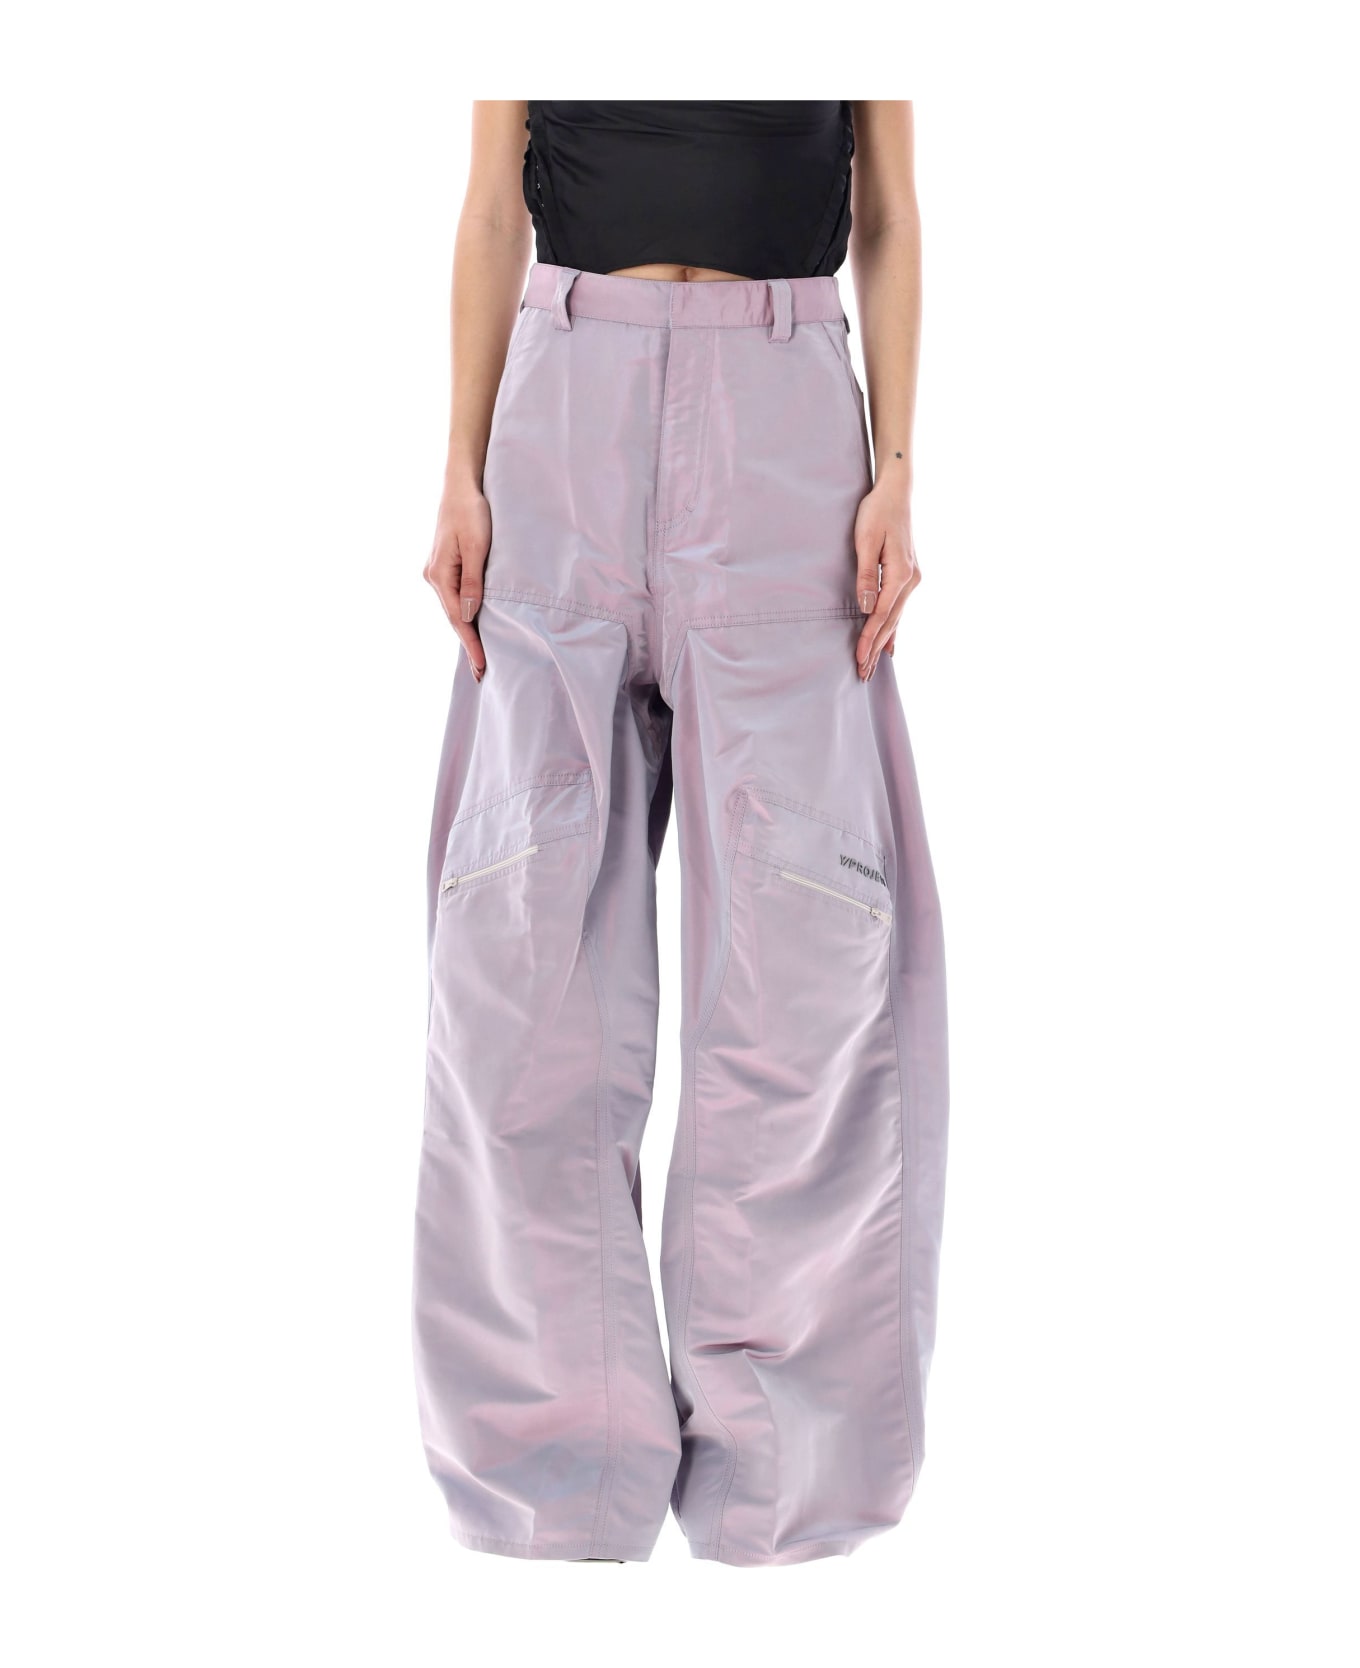 Y/Project Iridescent Pop-up Pants - IRIDESCENT LILAC